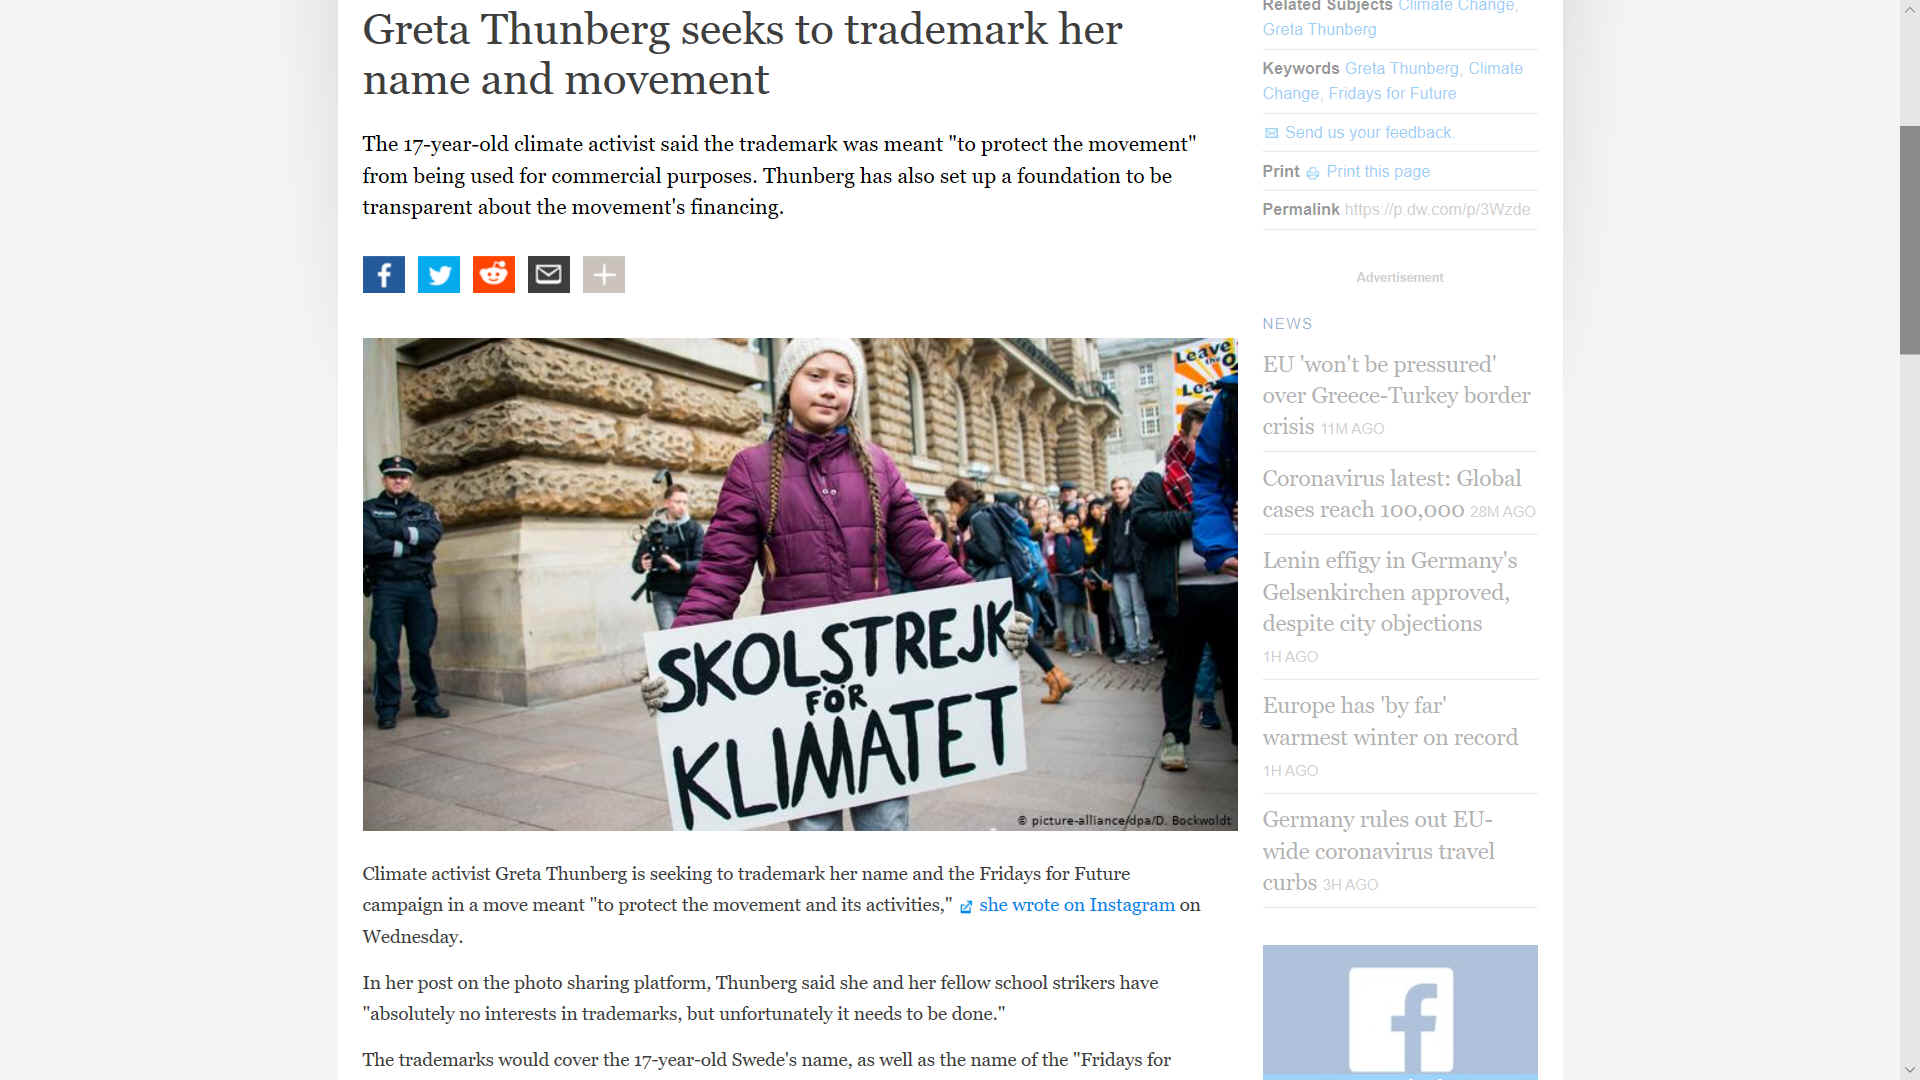 Greta Thunberg wants to see her name in trademarked lights